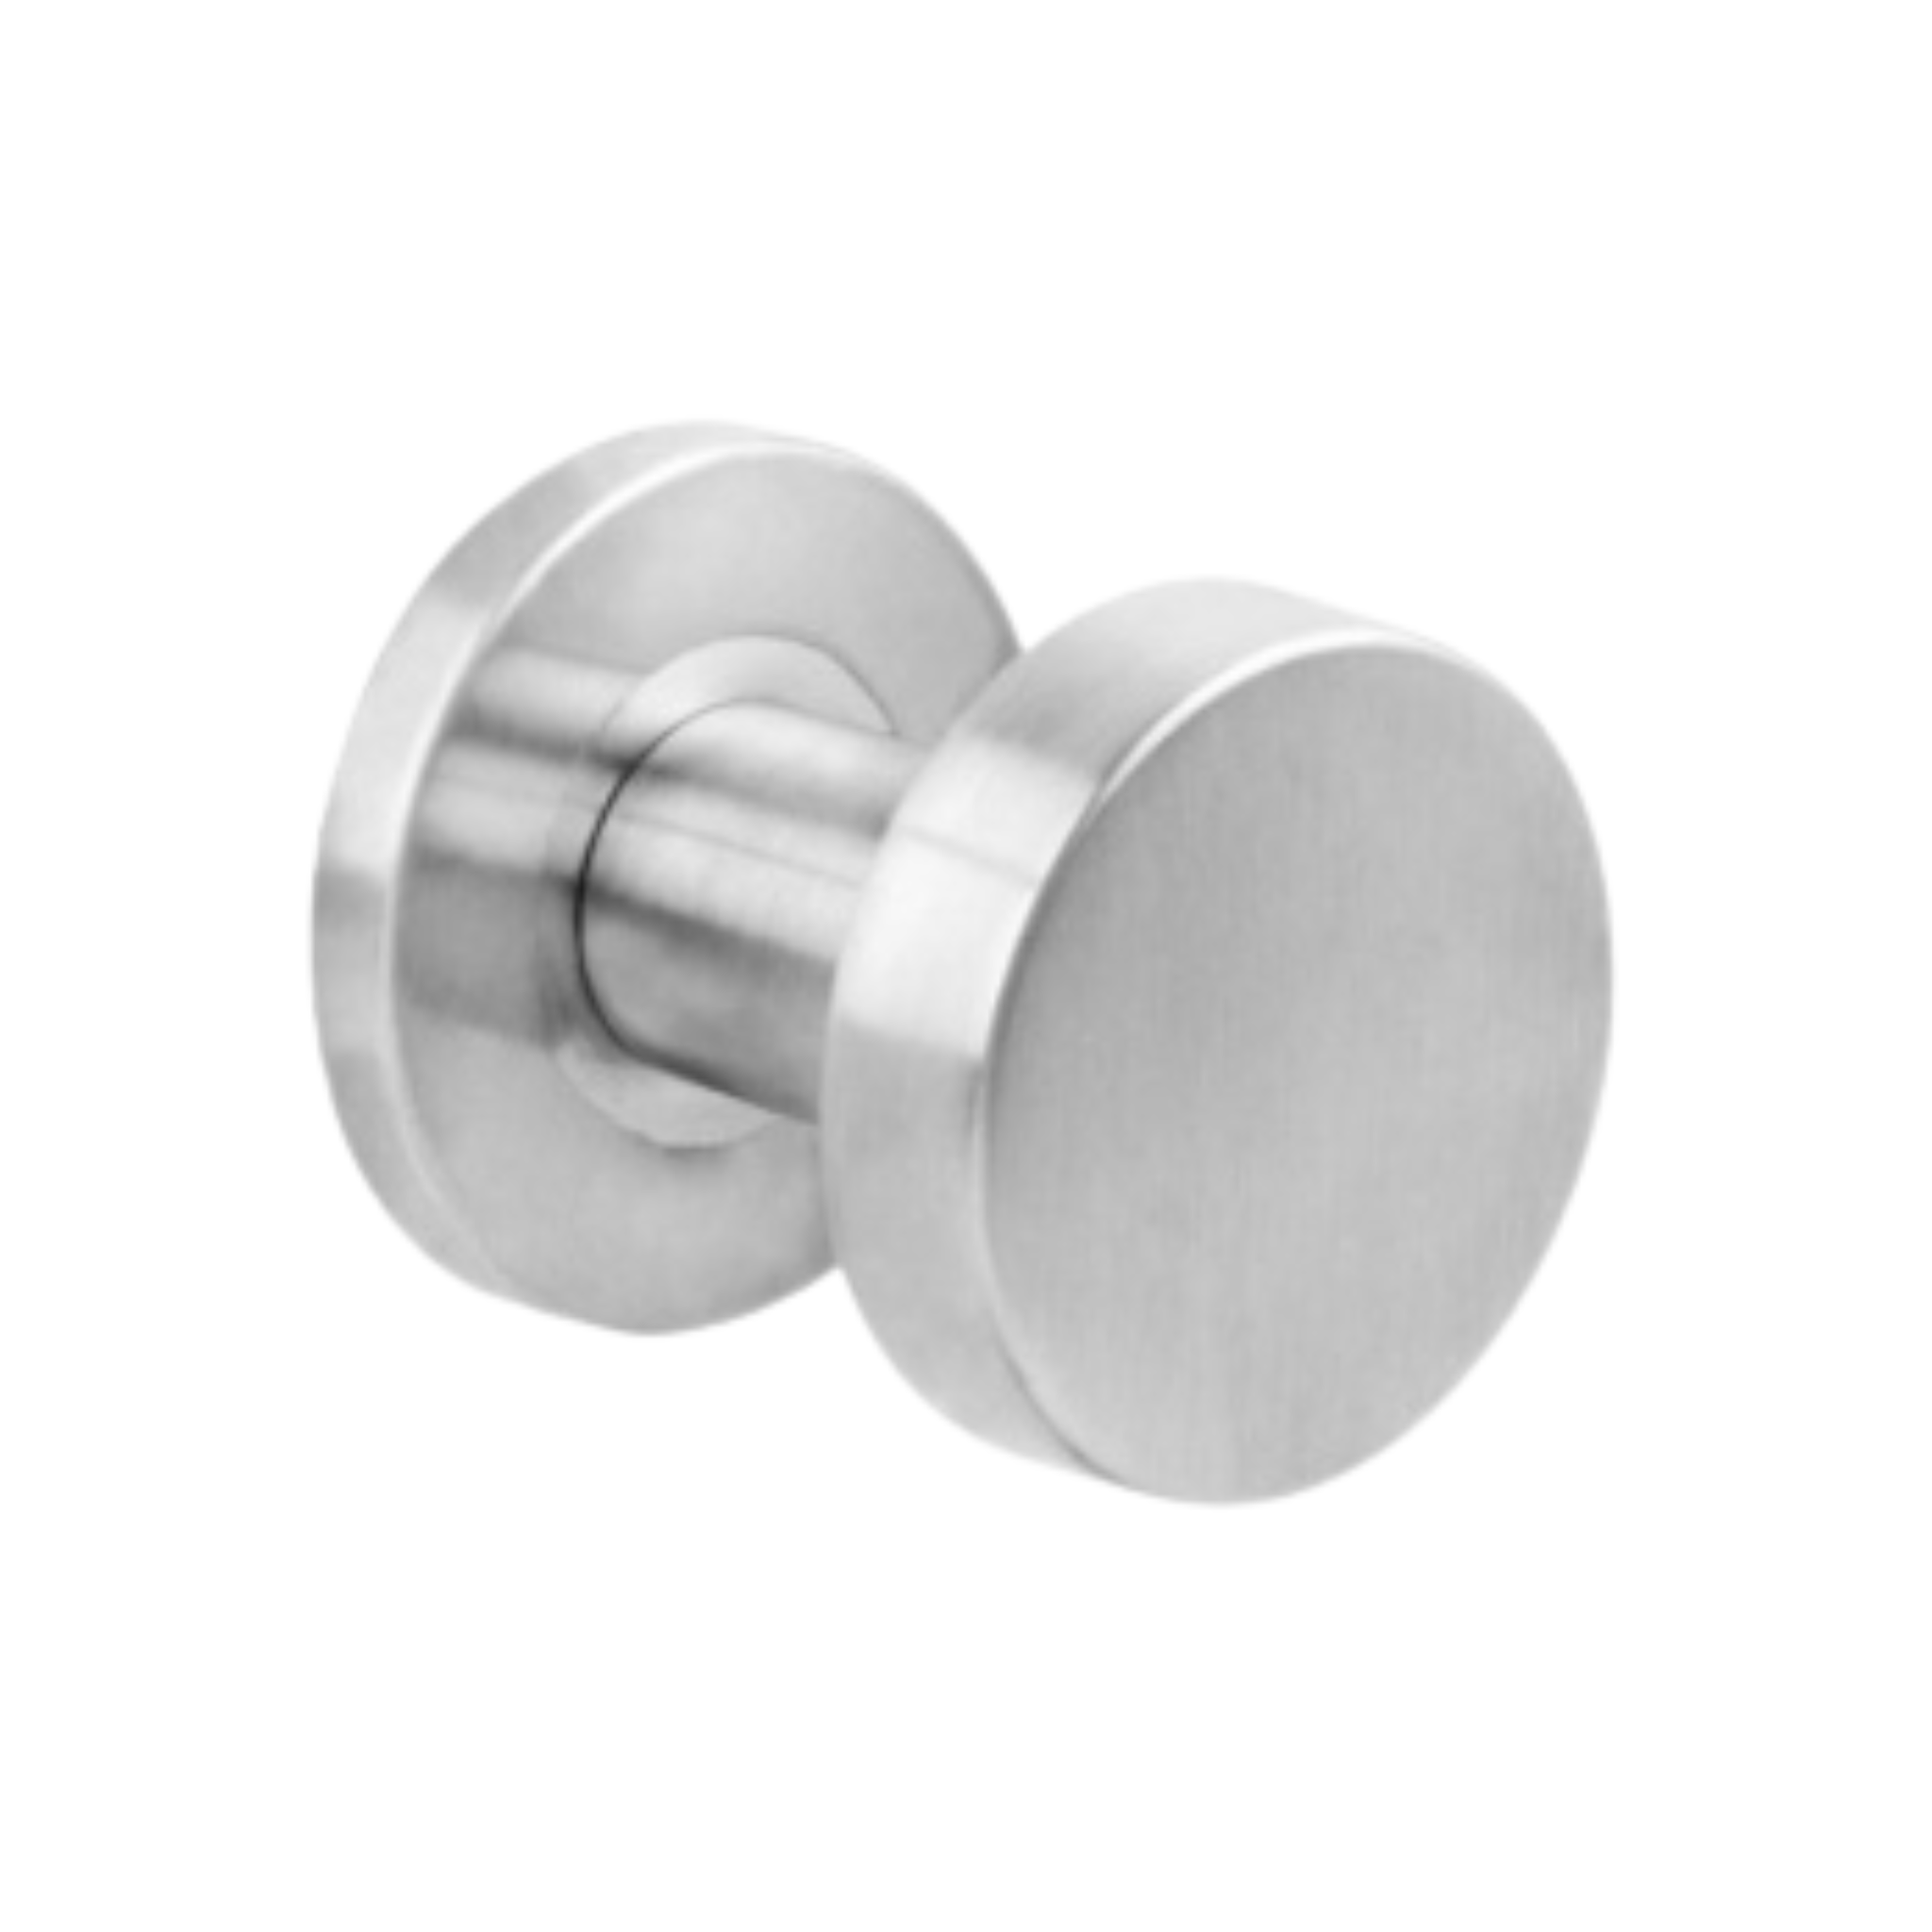 QS3805, Knob Handle, Fixed Round Flat, Stainless Steel, QS